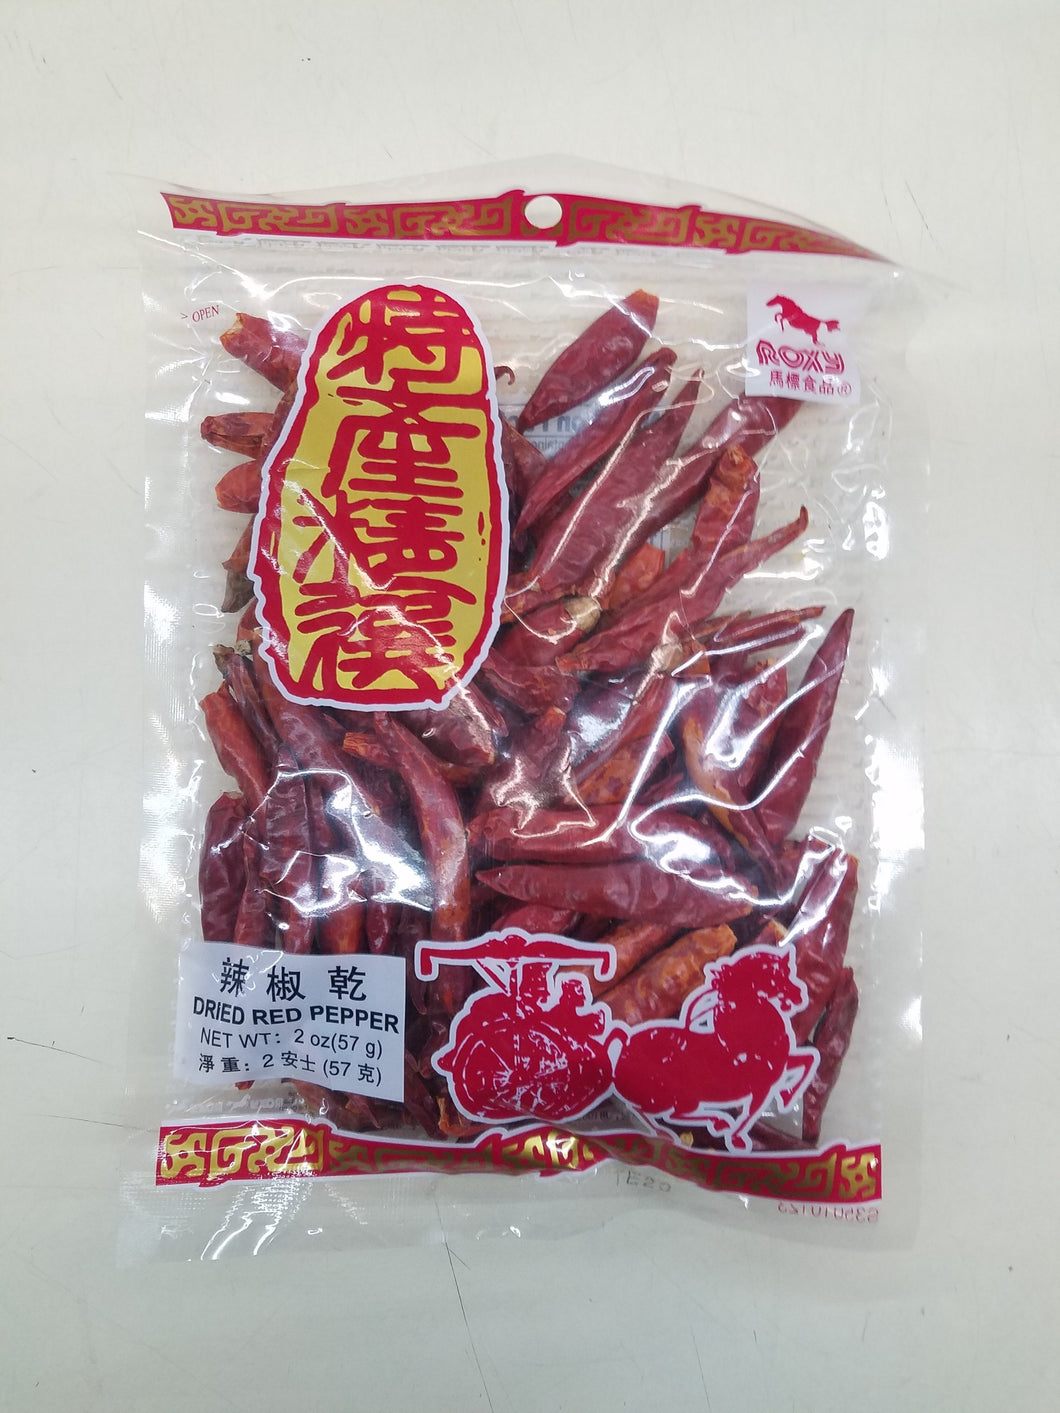 Roxy Chinese Dried Red Peppers